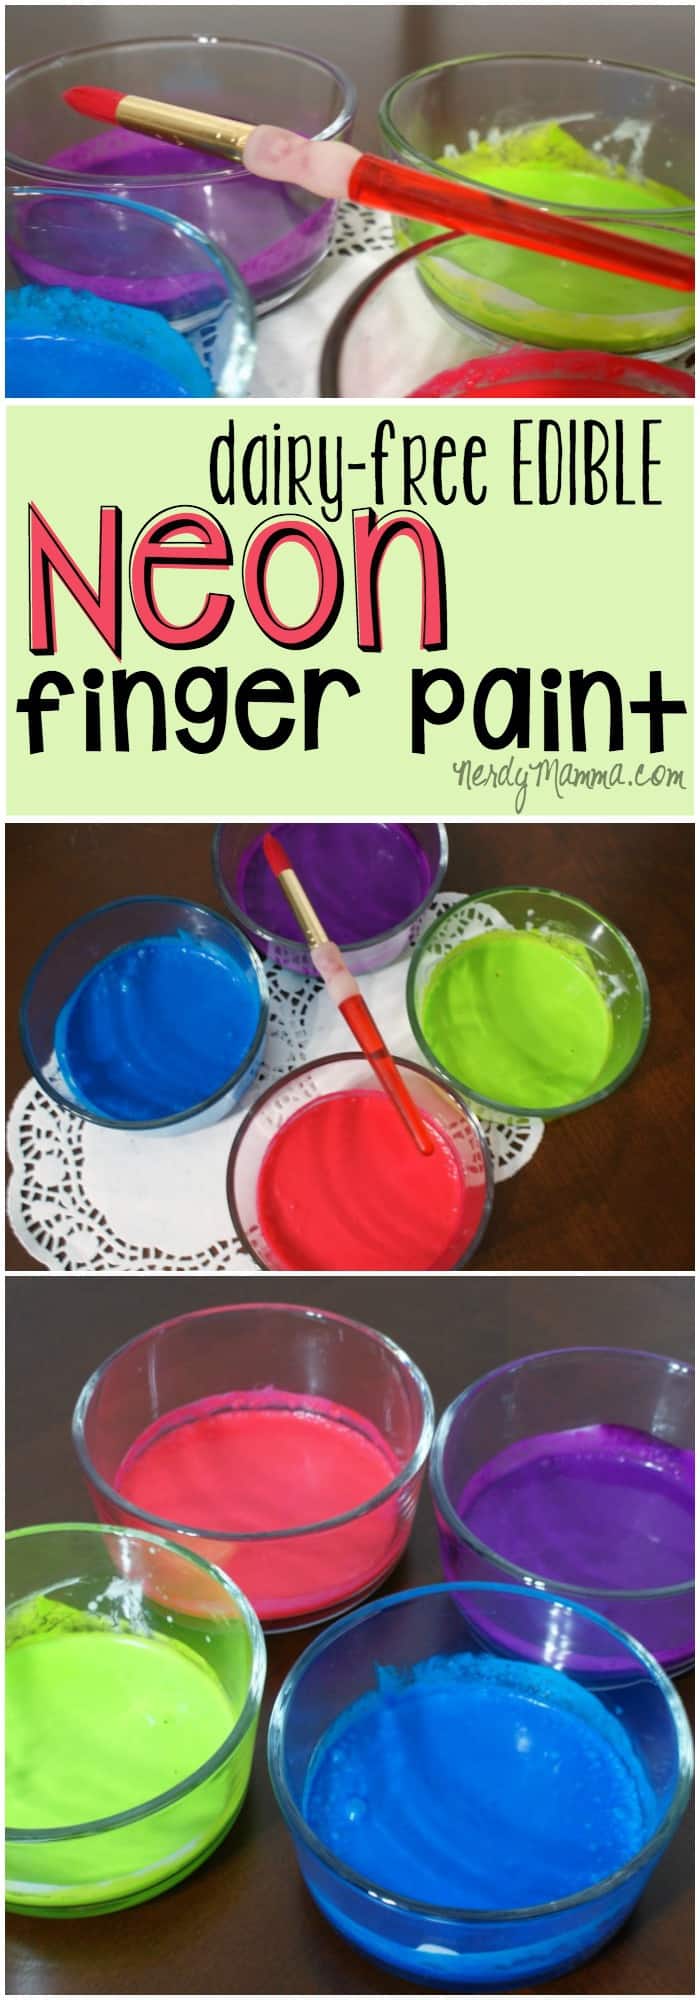 My toddler had so much fun with this dairy-free edible neon finger paint. And I had fun playing with her...kinda cool.